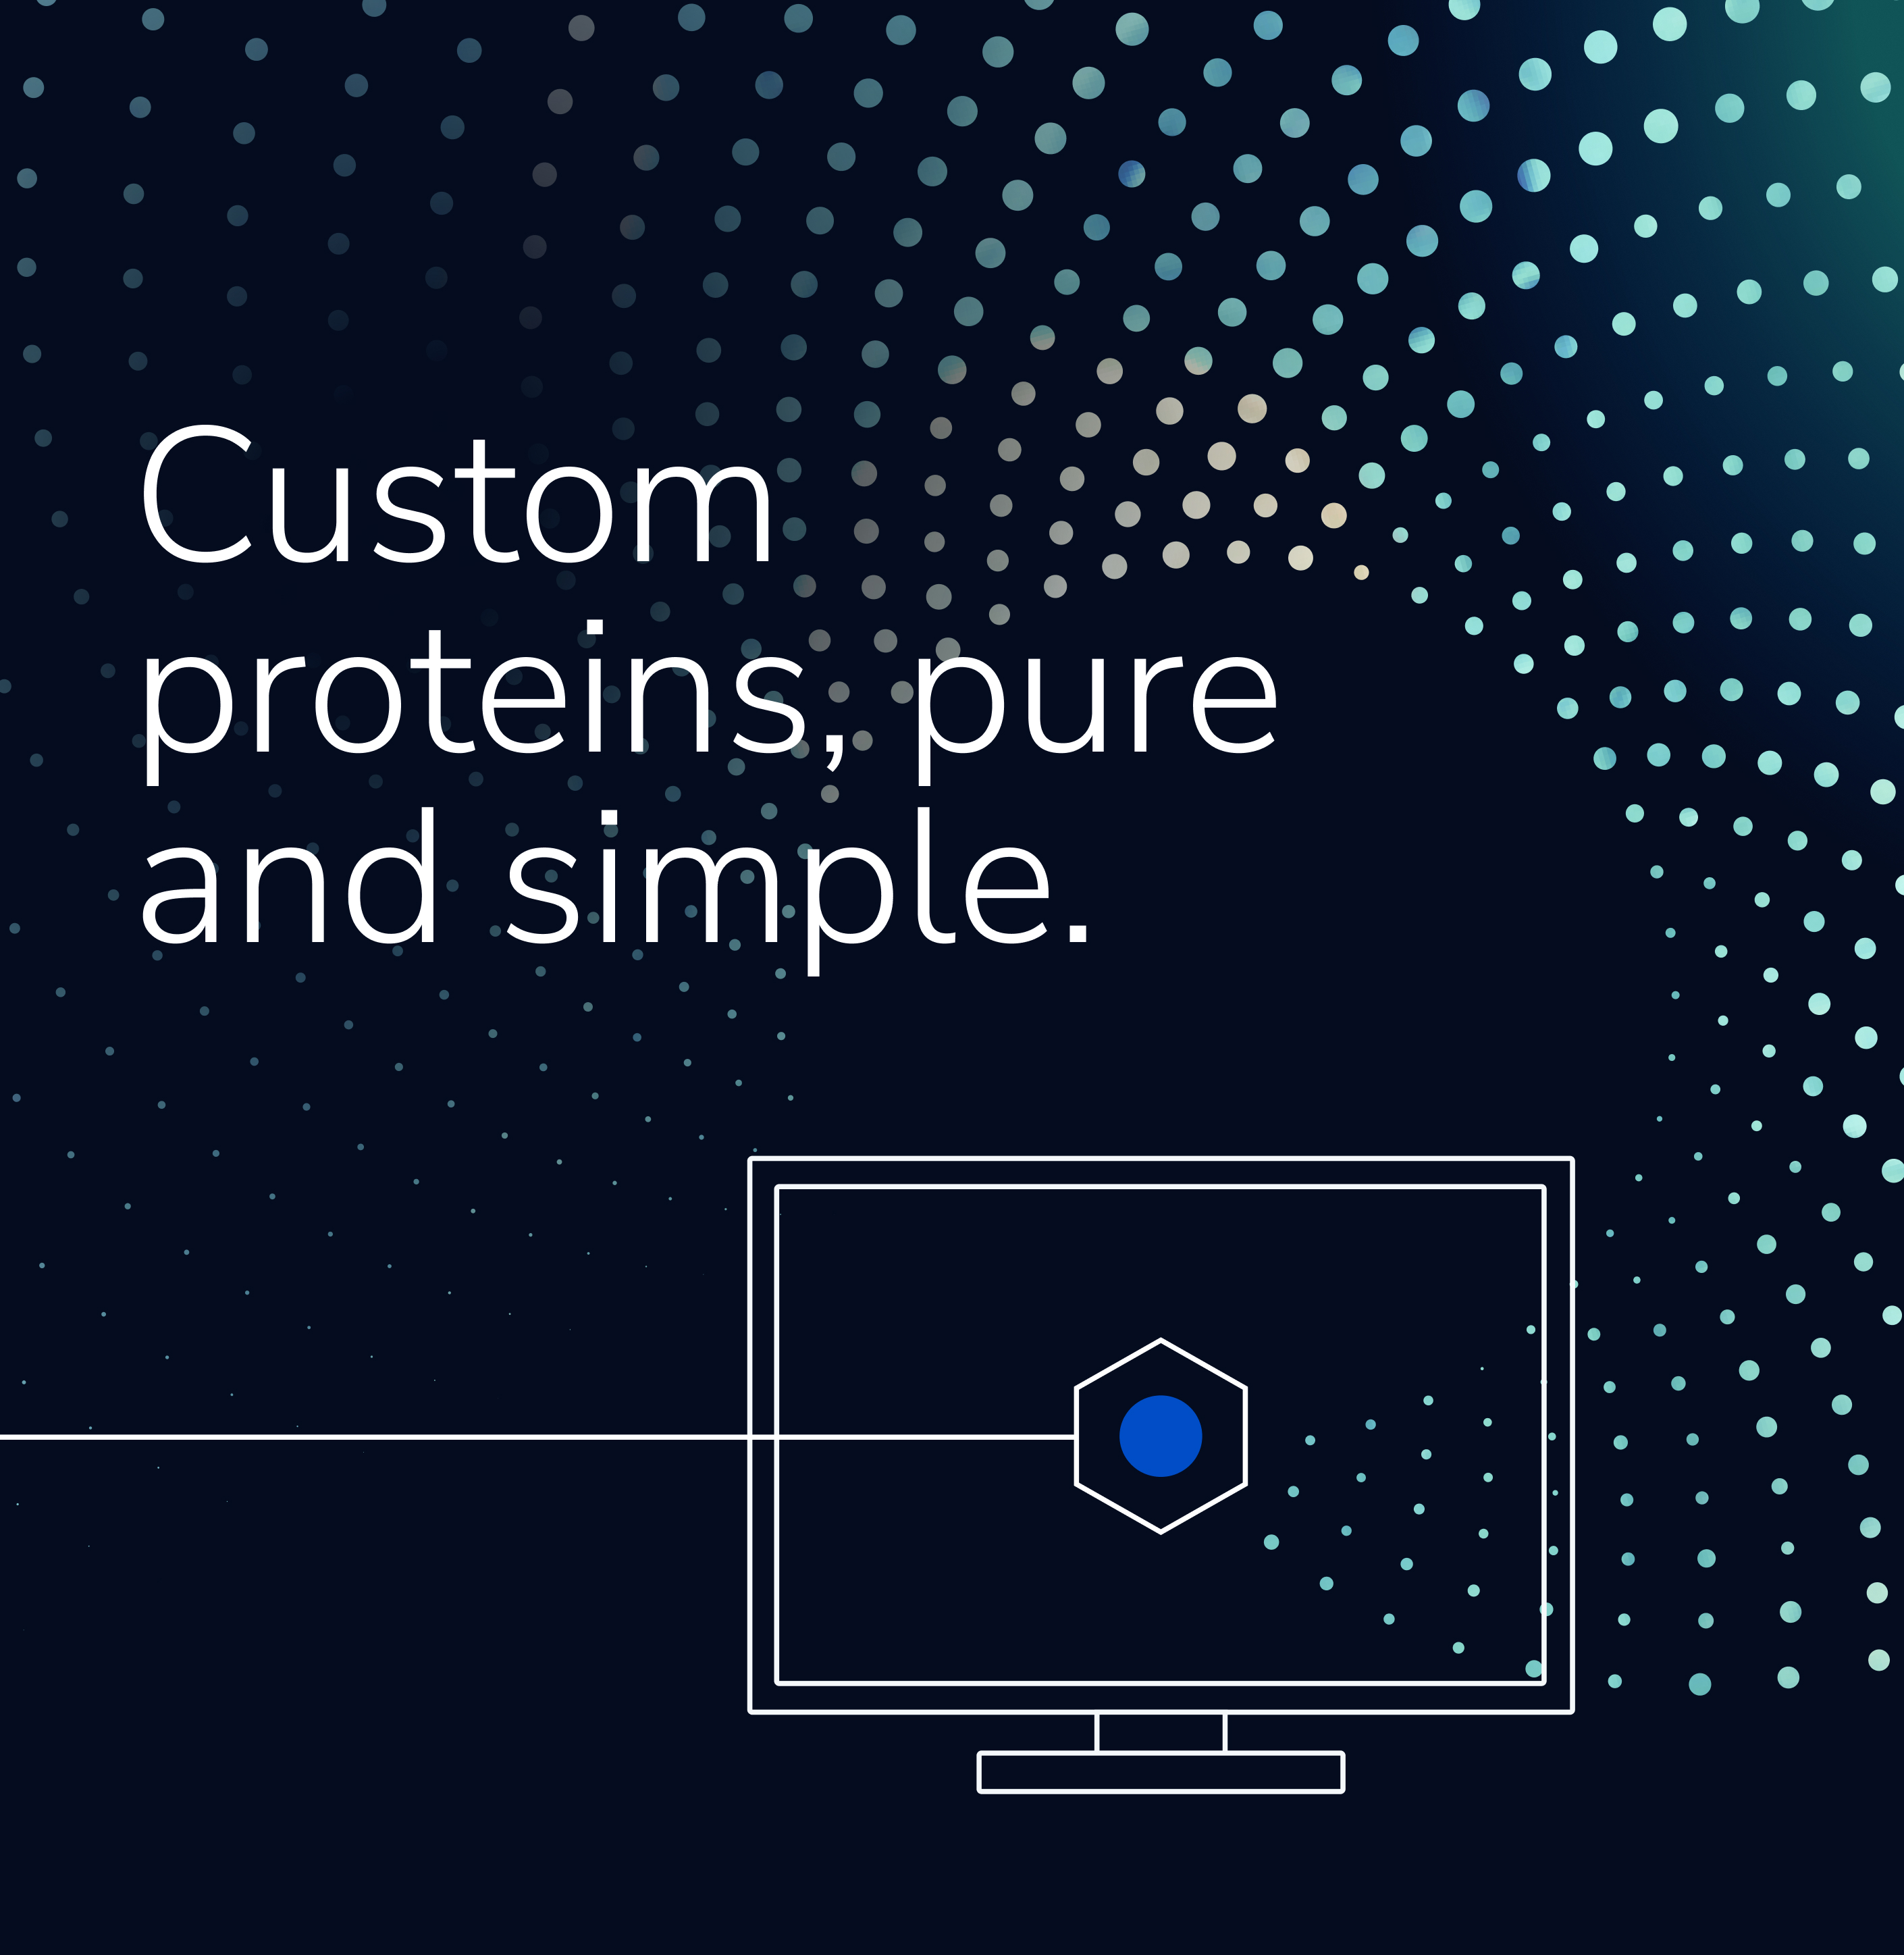 A stylized computer graphic. Text: Custom proteins, pure and simple.